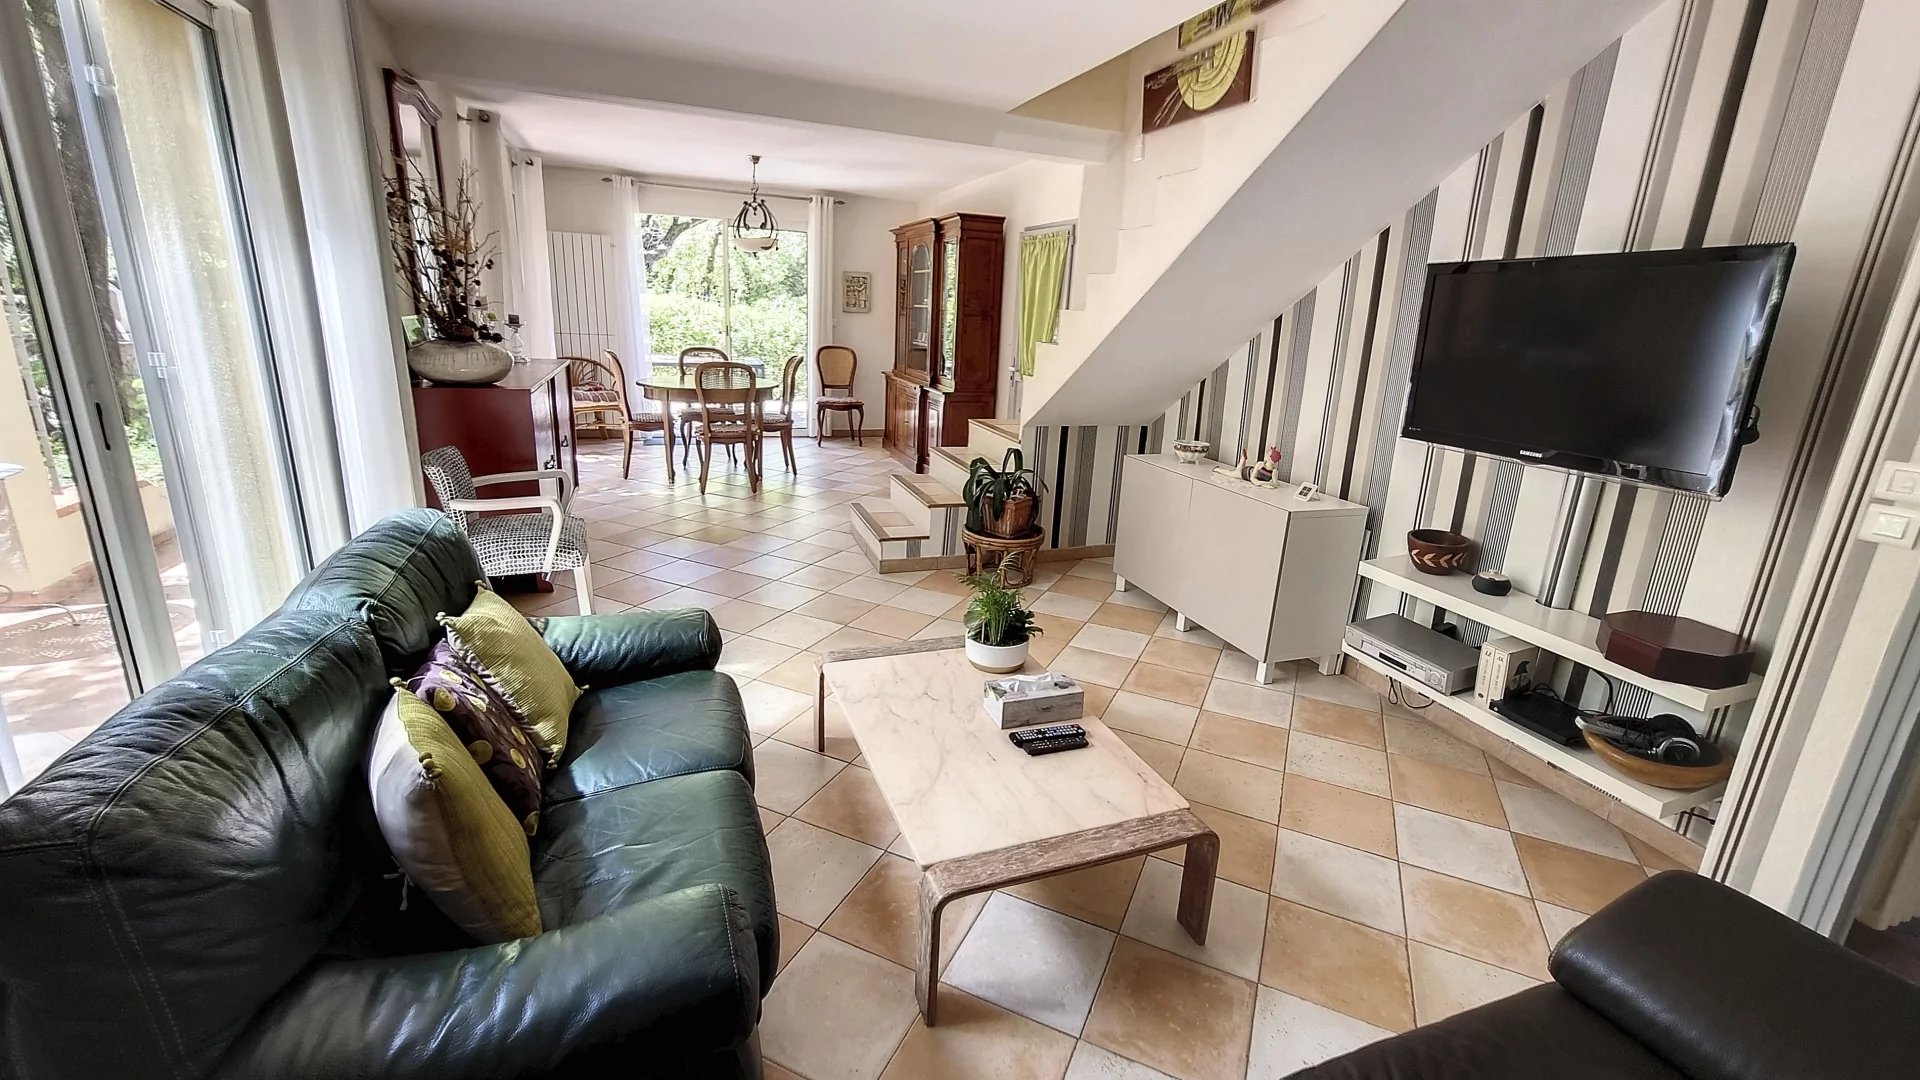 7-ROOM HOUSE 165m² IN QUIET GRASSE ST-JACQUES